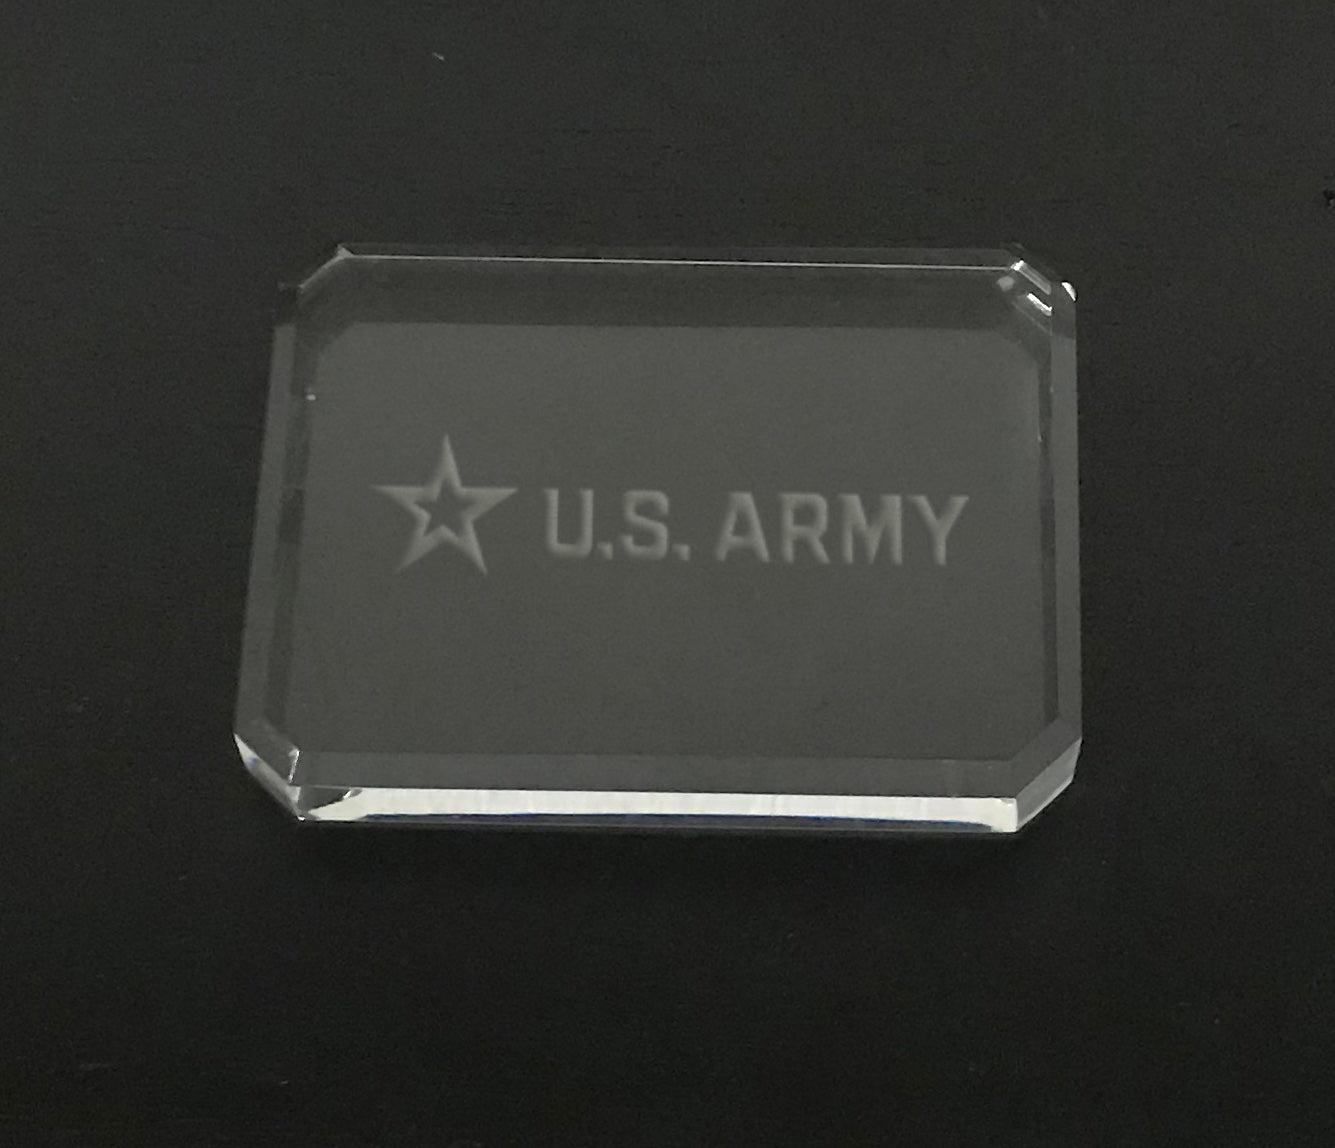 US Army STAR-paperweight